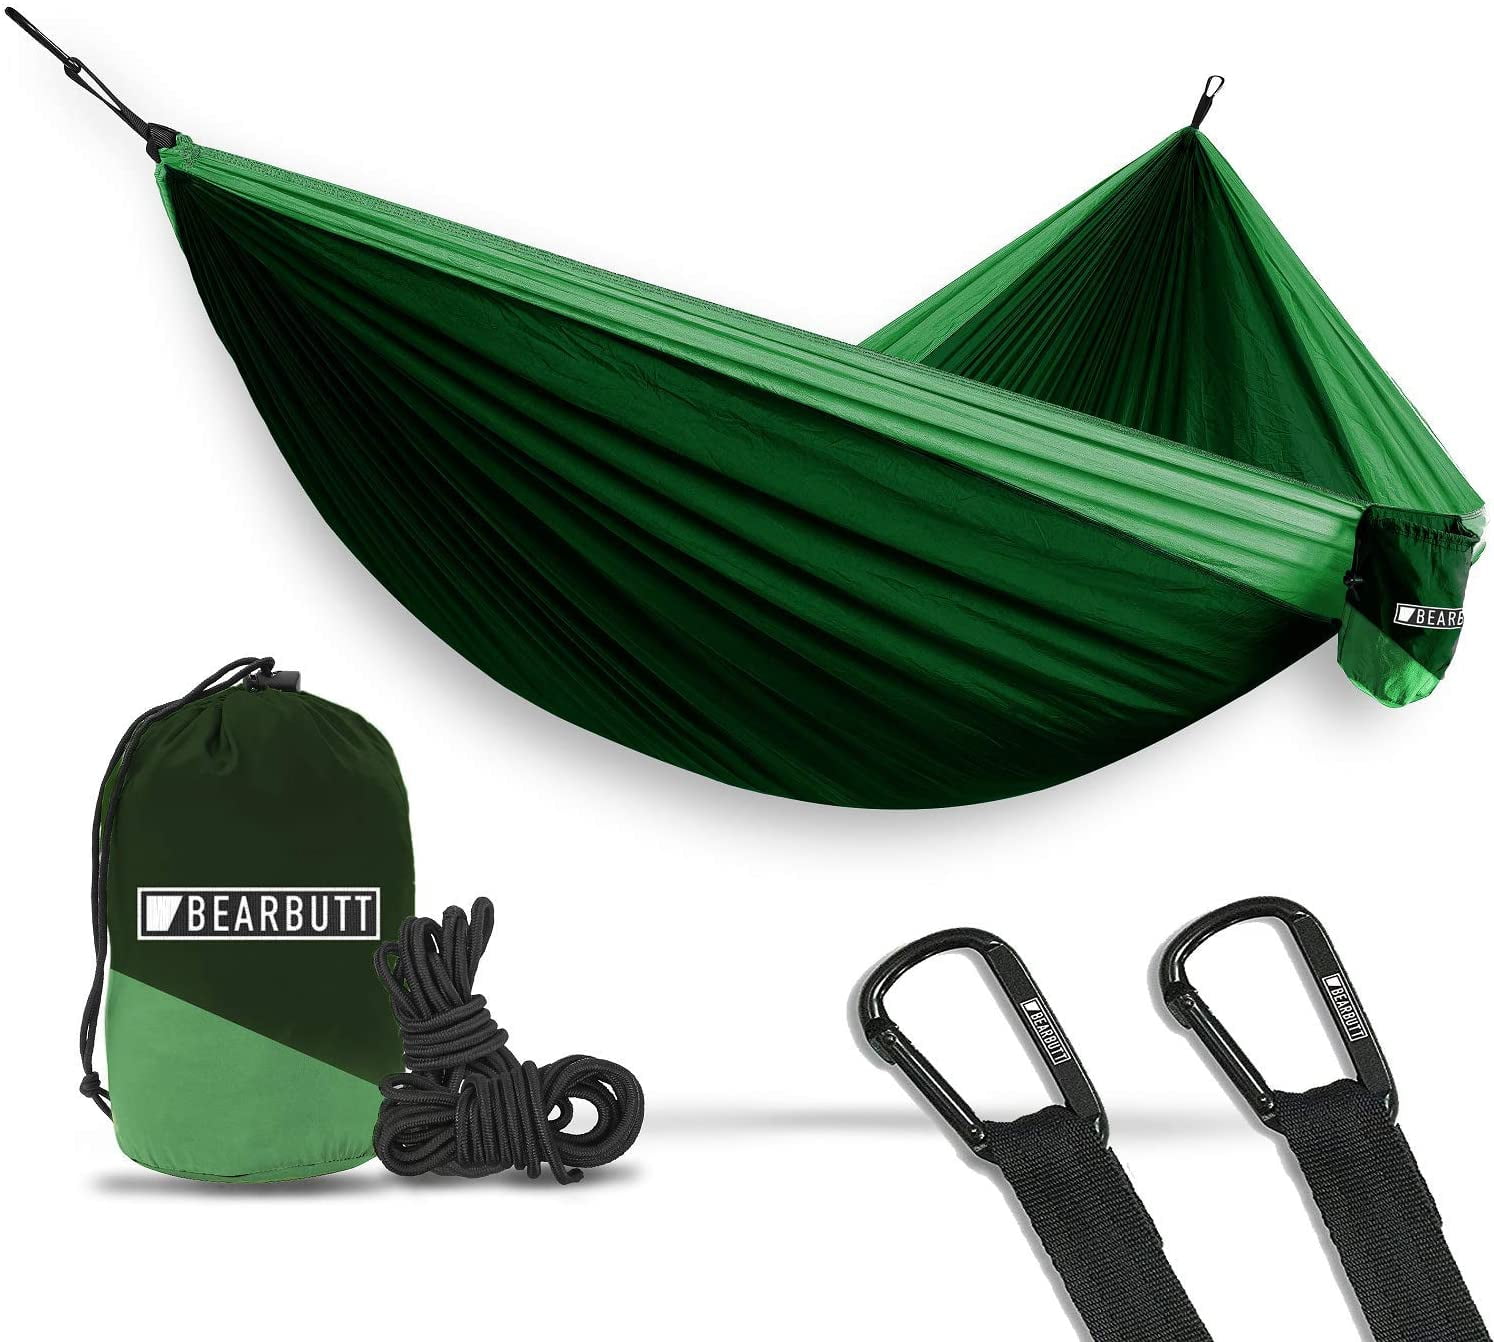 Tree & Hiking Gear Double hammock Camping Hammock for Outdoors Hammock that Holds 500lbs Portable hammock 2 Person Hammock for Travel Backpacking & Camping Gear outdoors Bear Butt Hammocks